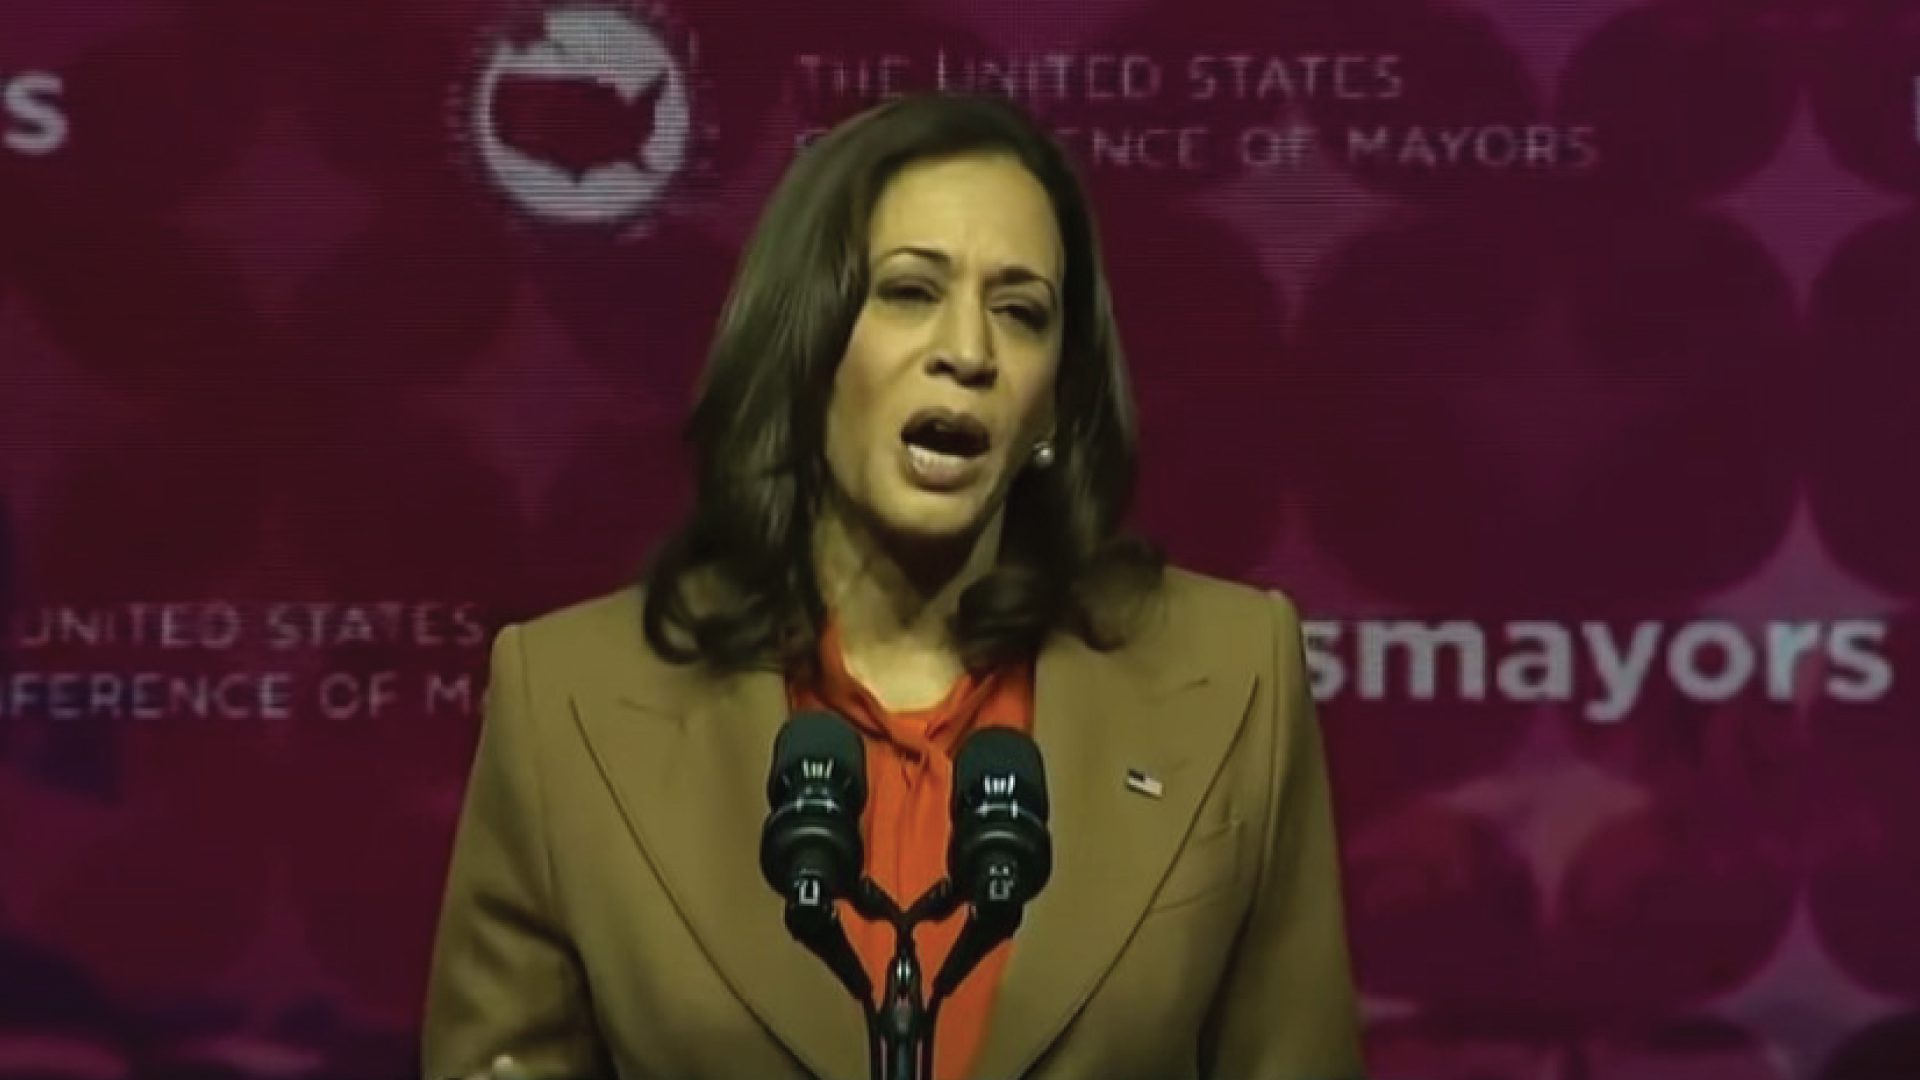 VP Kamala Harris appears to speak down to US mayors during conference.